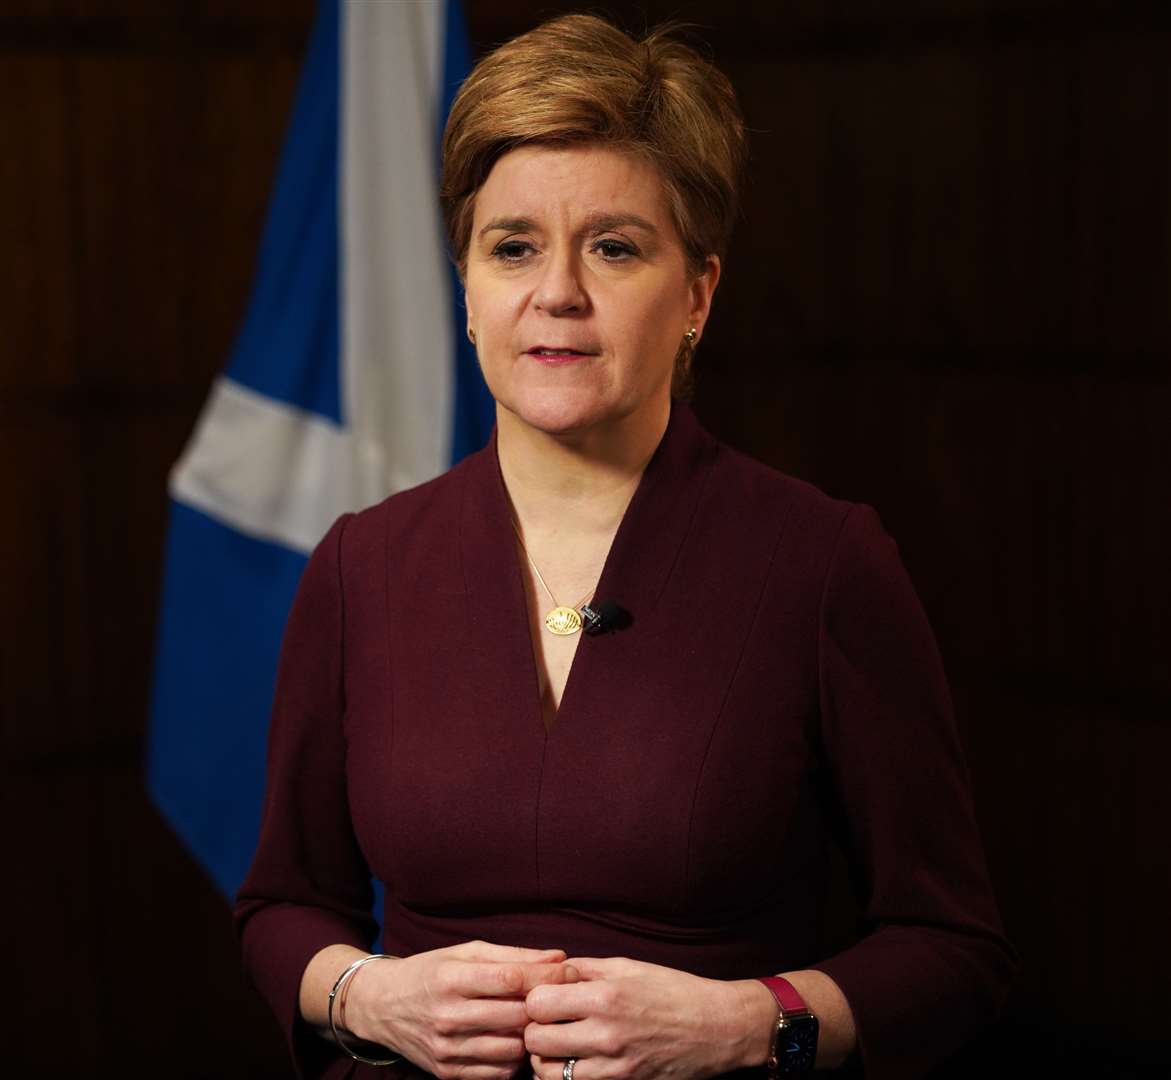 In her New Year message, Nicola Sturgeon emphasised that 'we need above all to keep each other safe'.